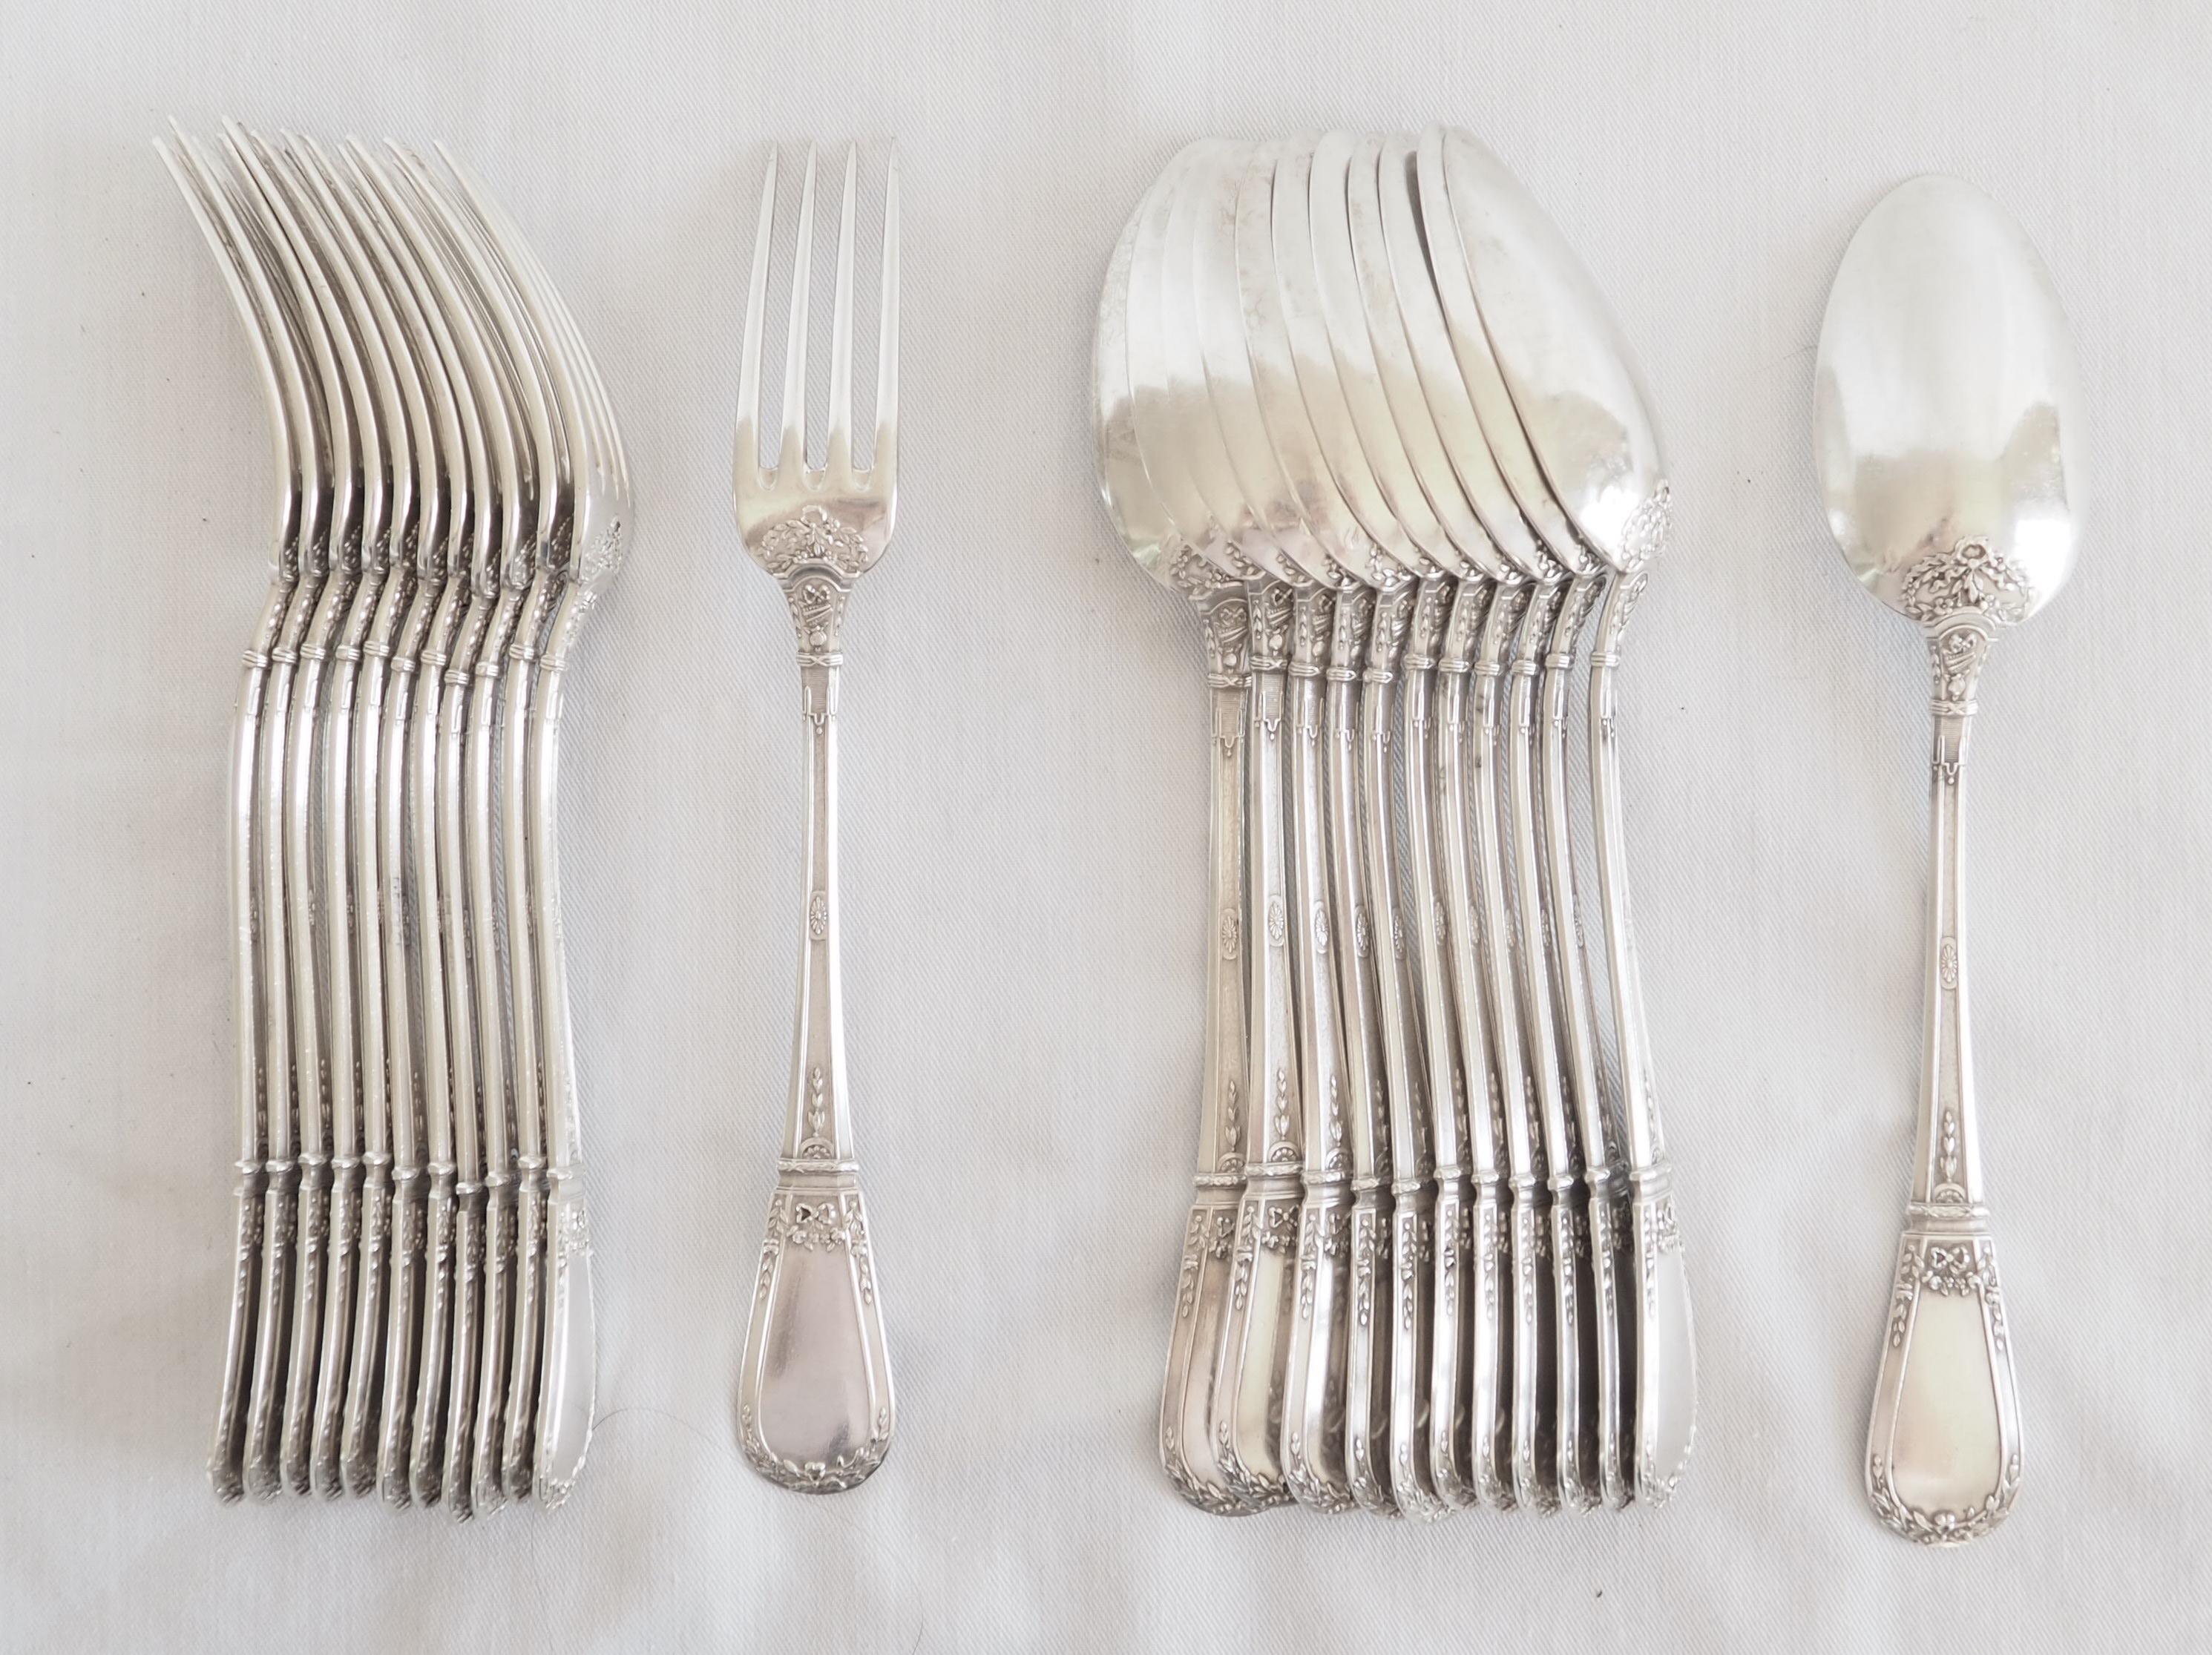 French antique sterling silver dessert flatware for 12 guests, 24 pieces composed of 12 dessert spoons and 12 dessert forks.

Very elegant late 19th century production, high-end quality set with perfect proportions, rich and much refined Louis XVI